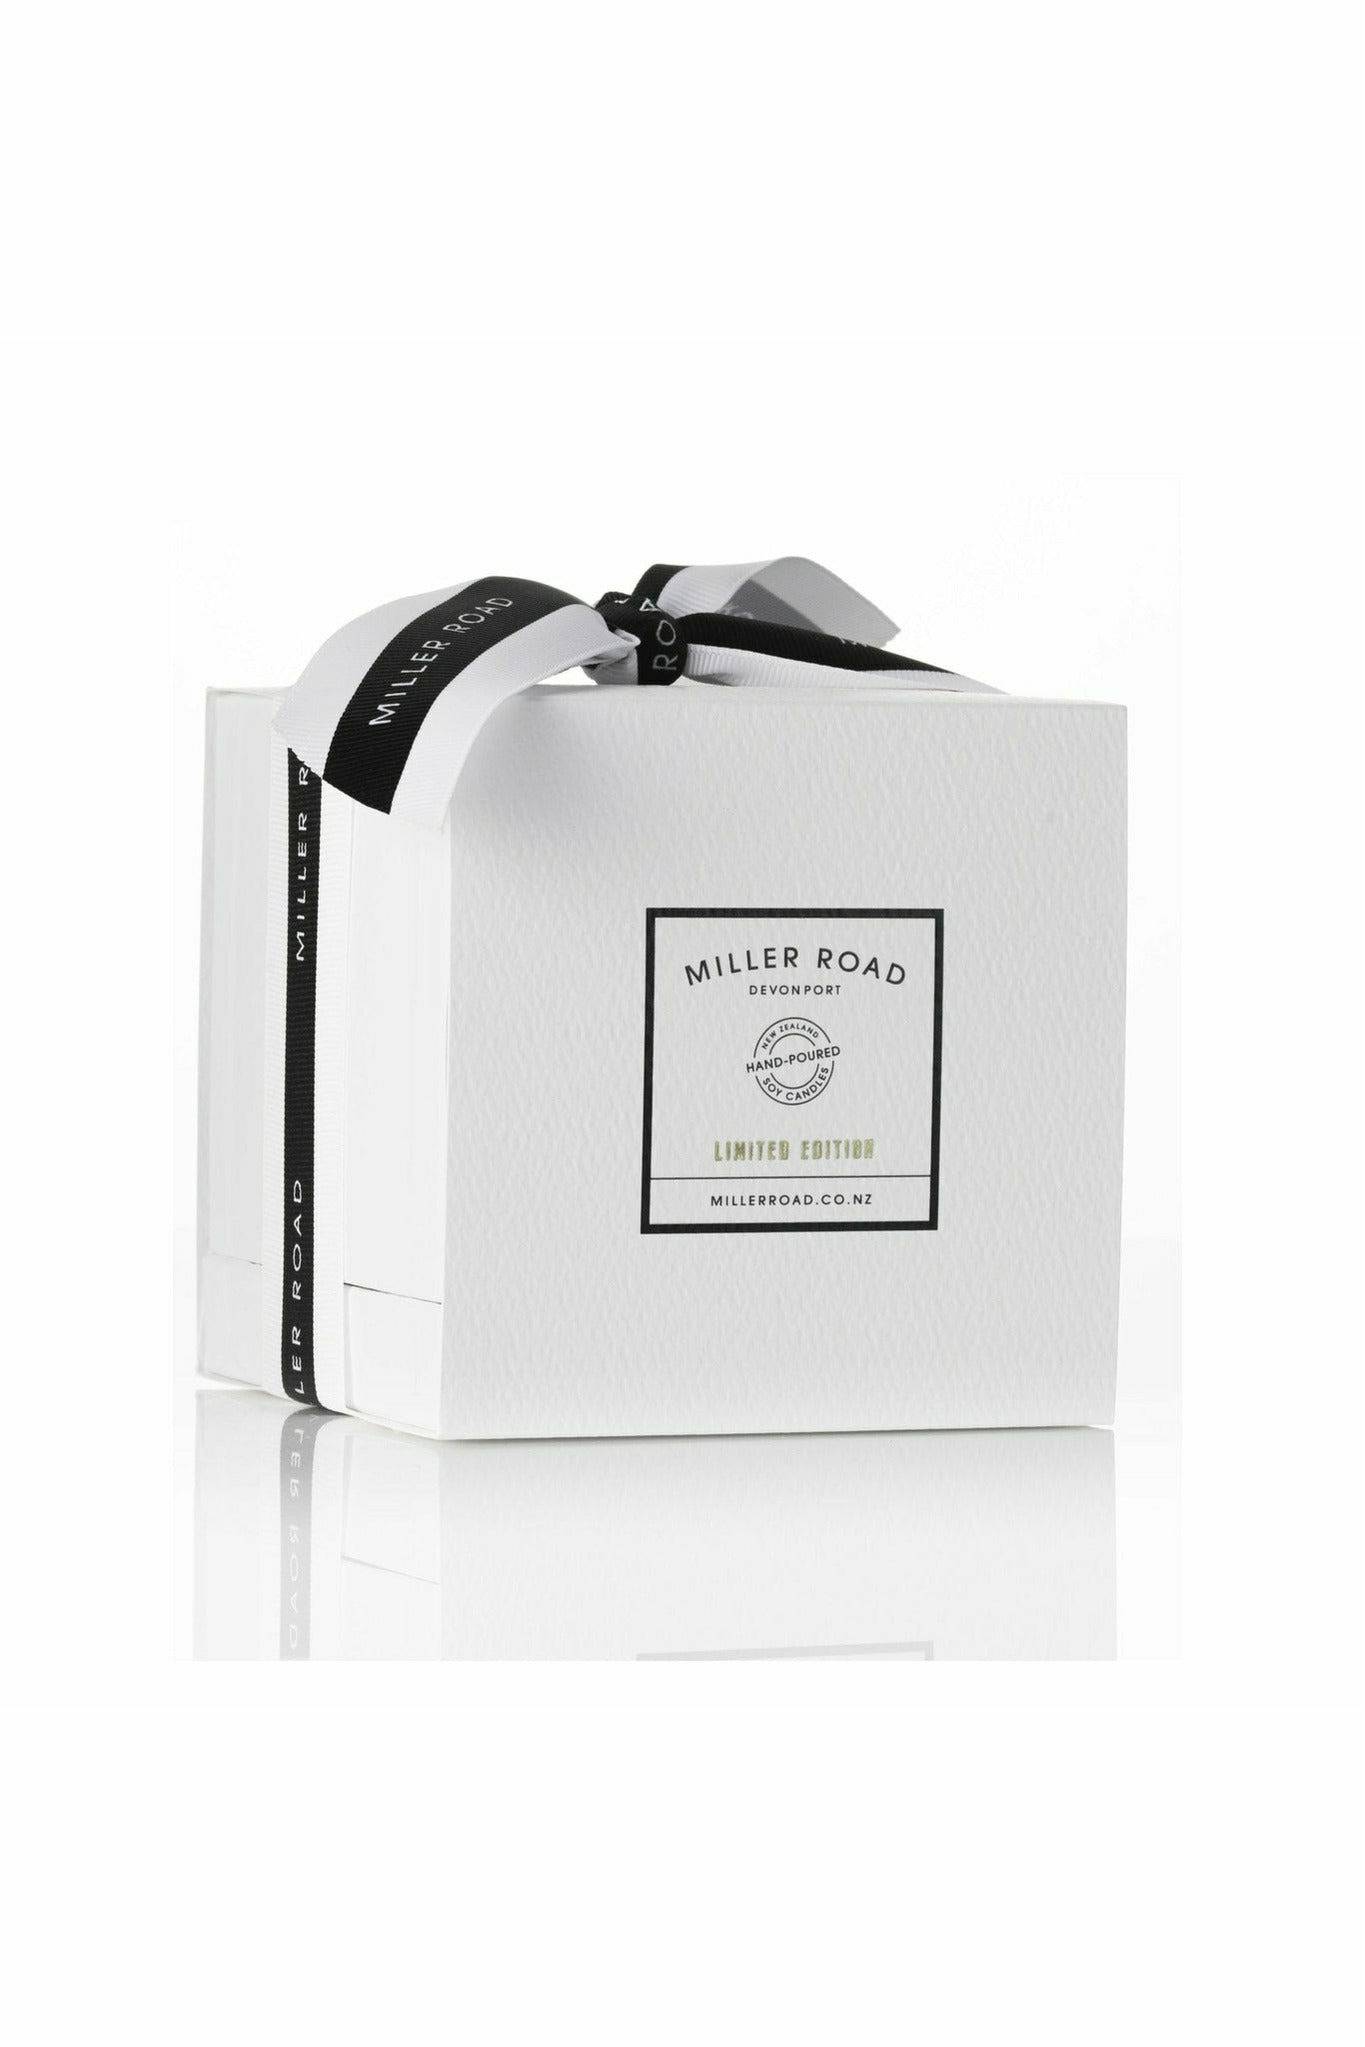 WHITE LUXURY CANDLE - MILLER ROAD - Coko